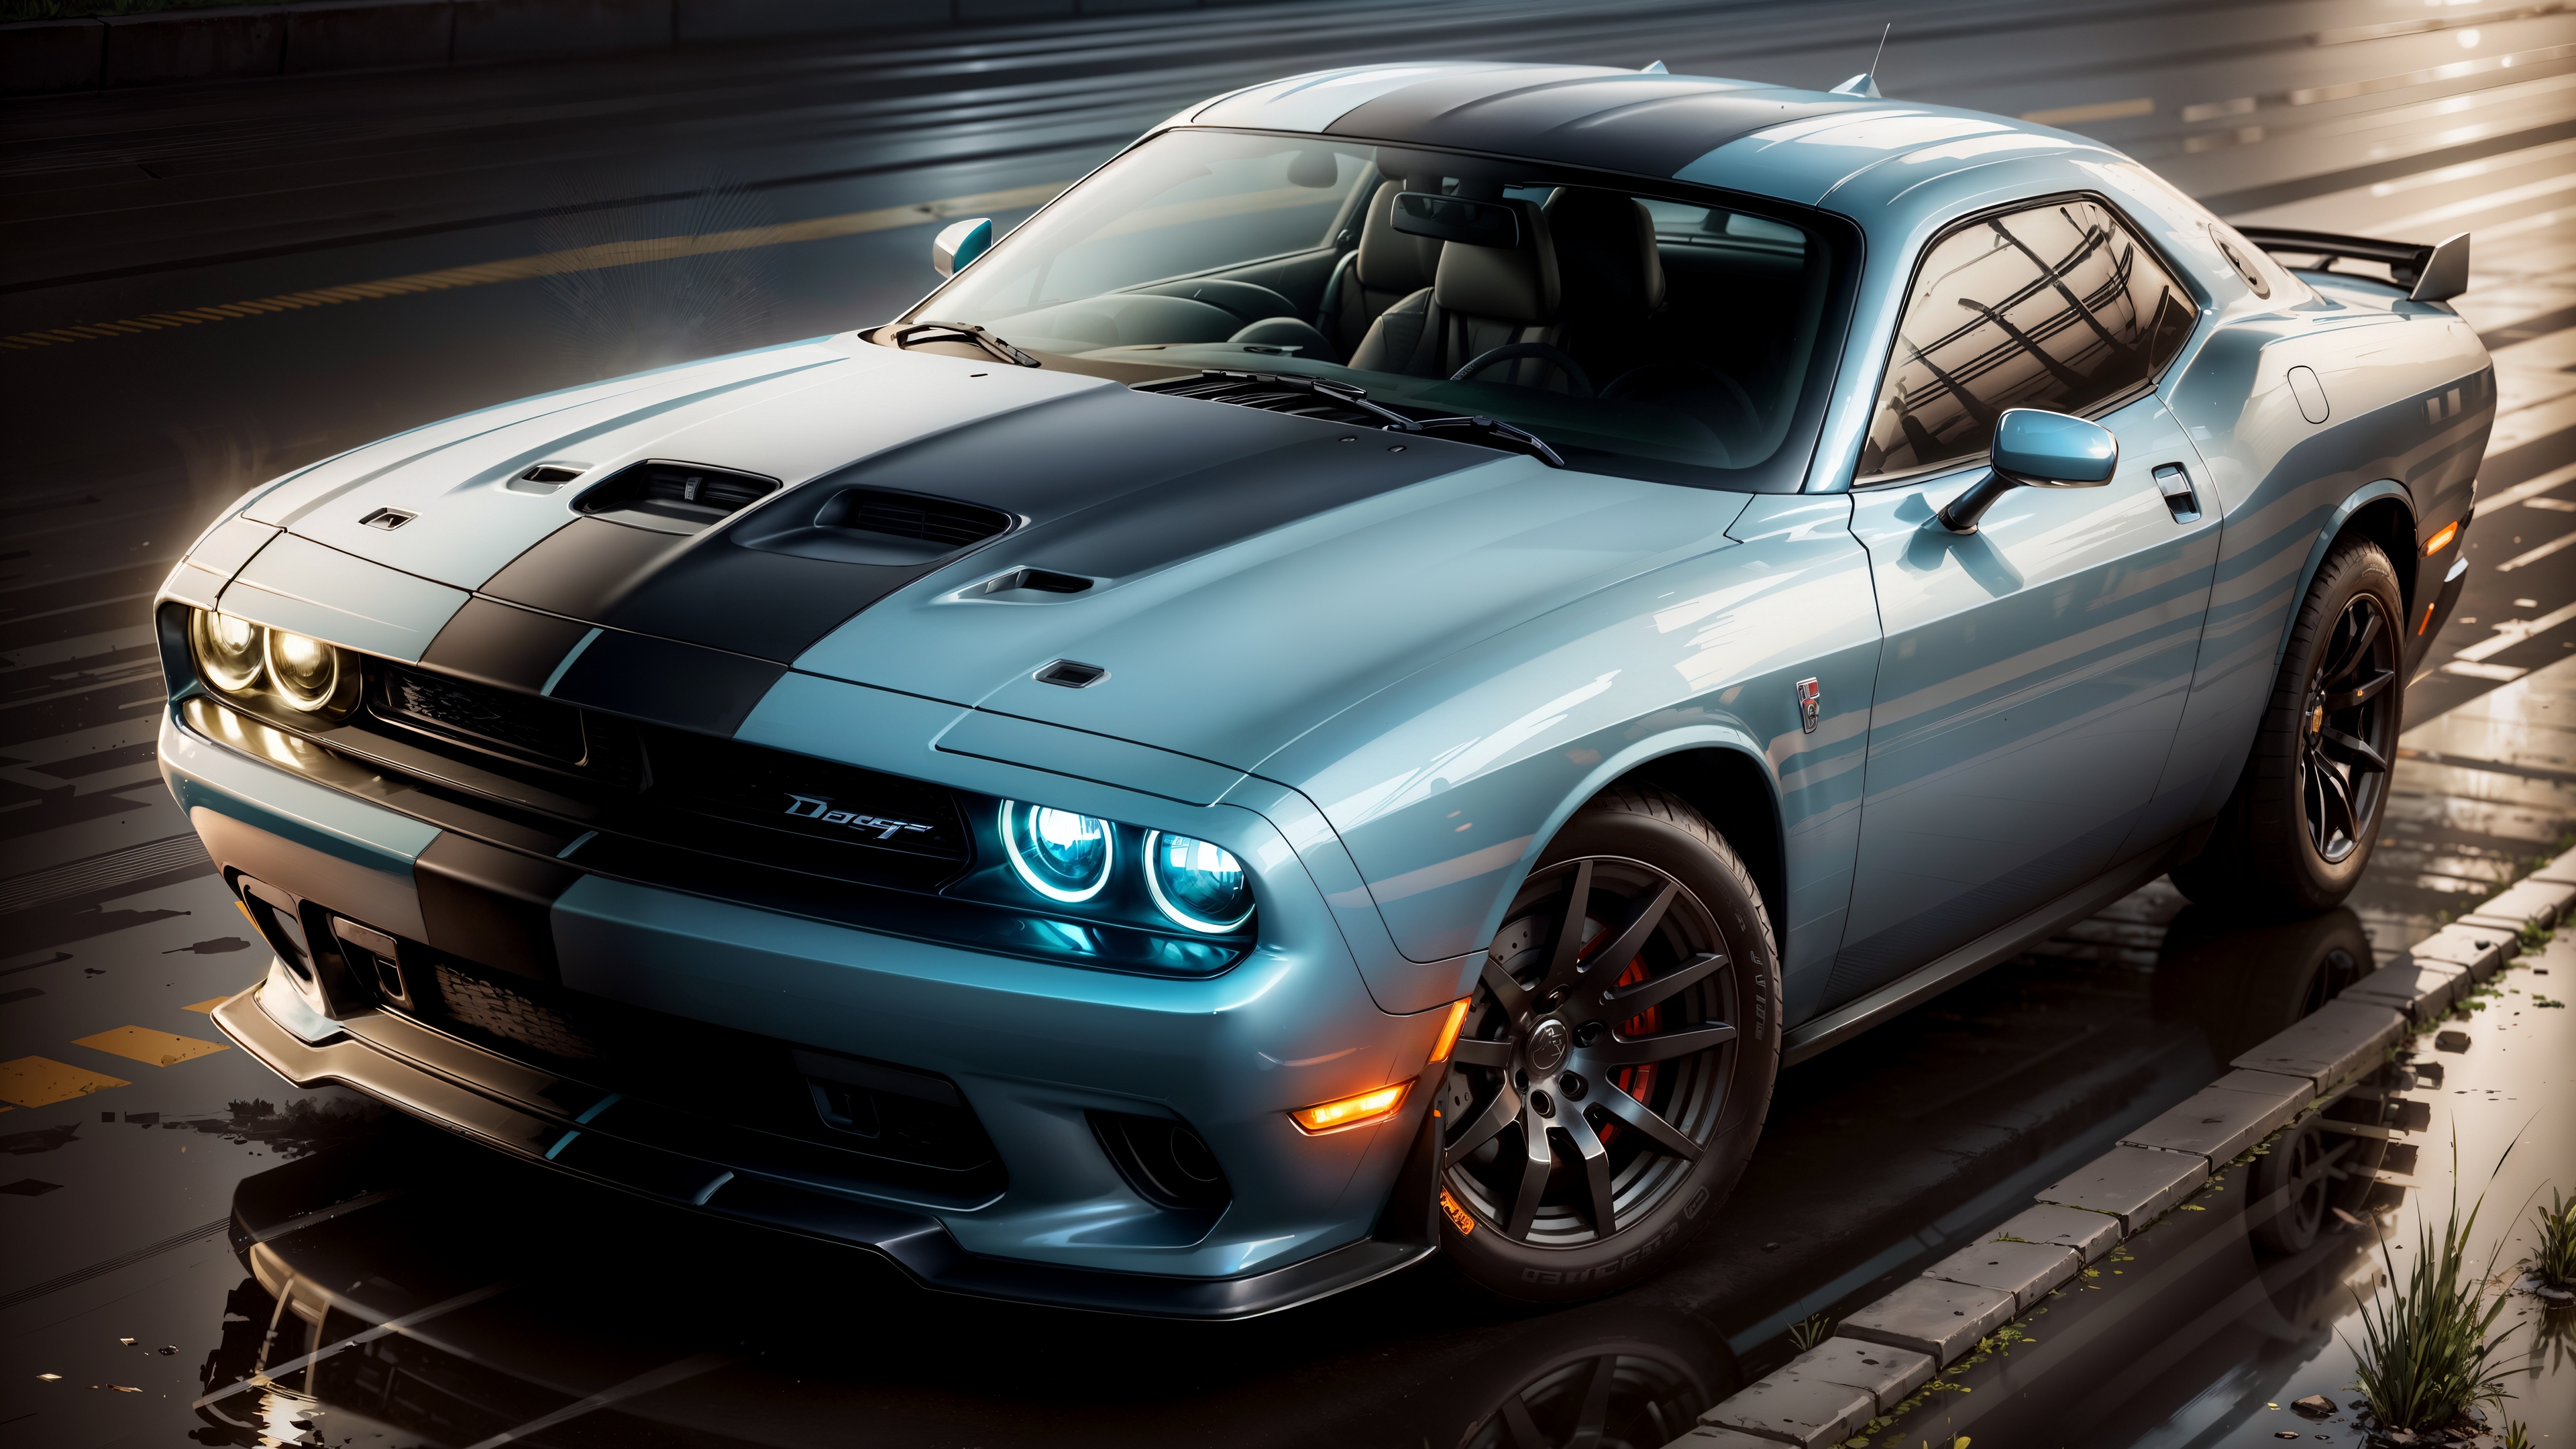 This Dodge Challenger was designed for you!